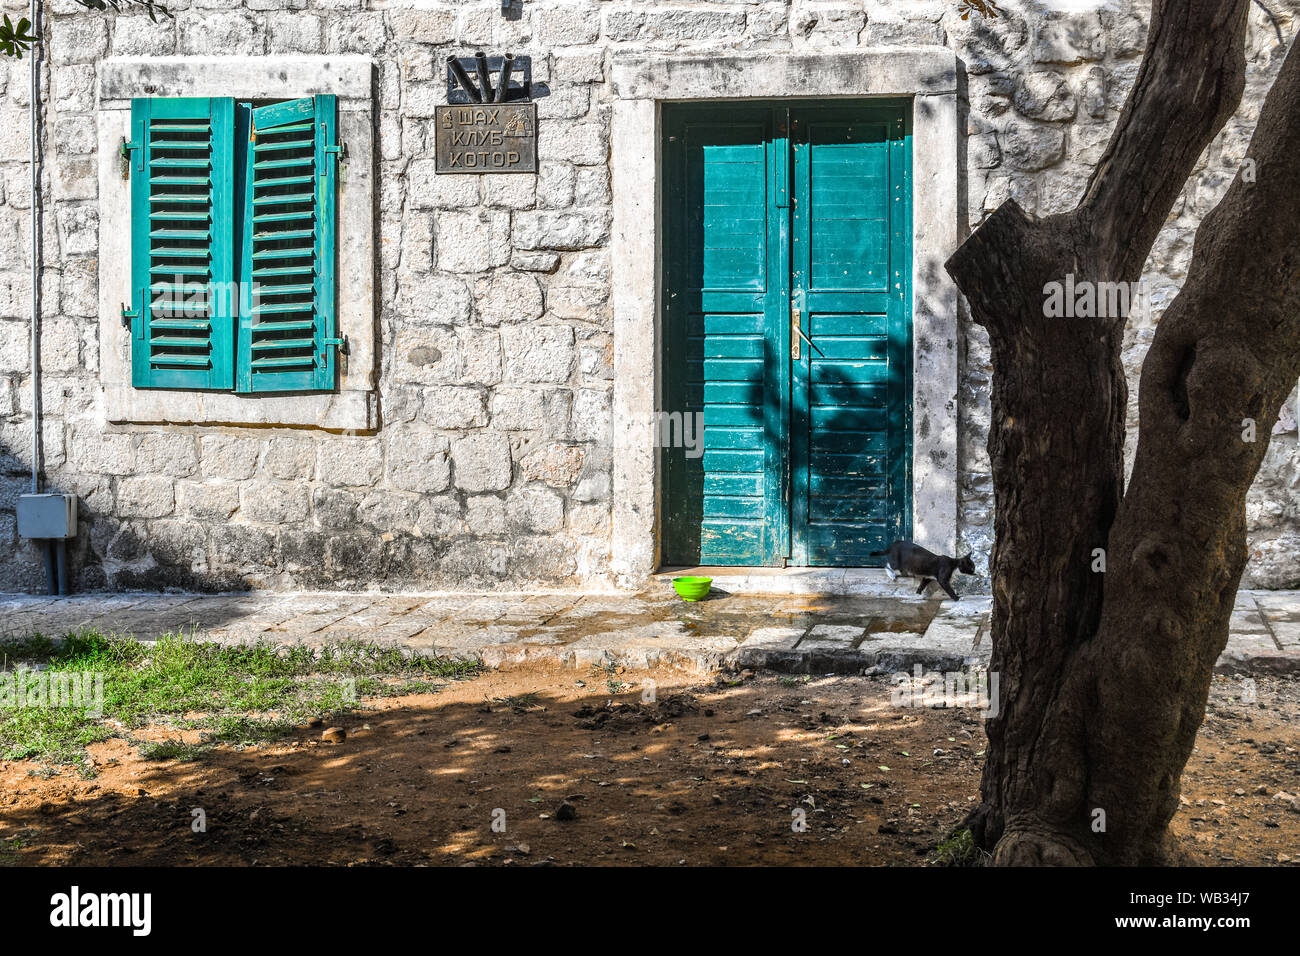 A stray black and white cat walks across the doorstep past teal colored doors and shutters in the medieval walled city of Kotor, Montenegro Stock Photo